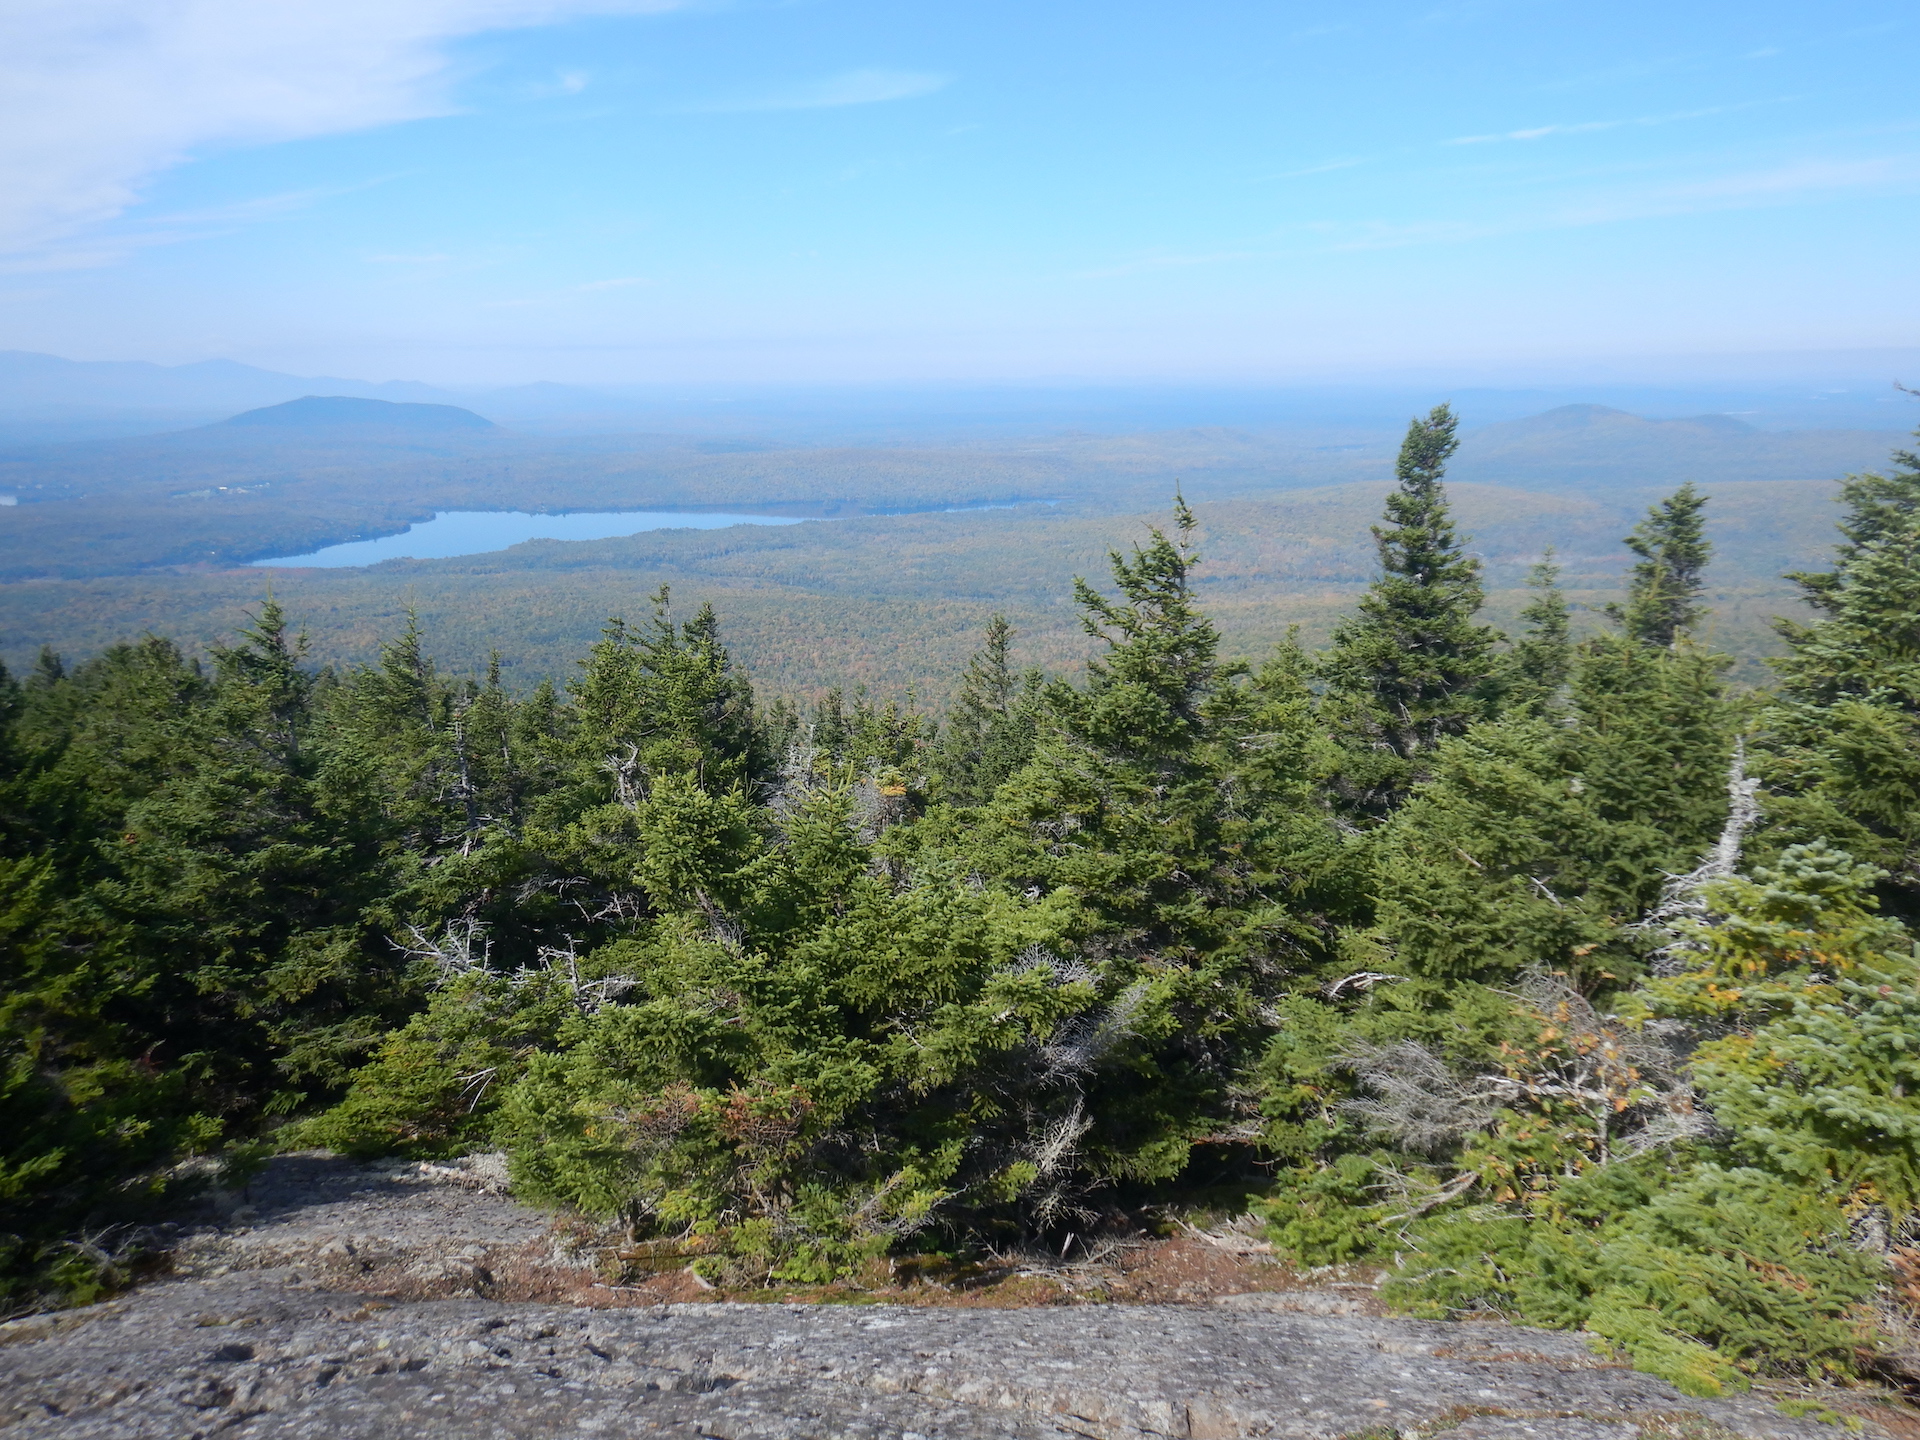 View of forested landscape from mountain summit. Bare rock covers the ground at bottom while spruce and fir trees cover the slopes. A pond is visible at center left. Haze obscures the horizon. The low elevation forest is speckled with yellow foliage.